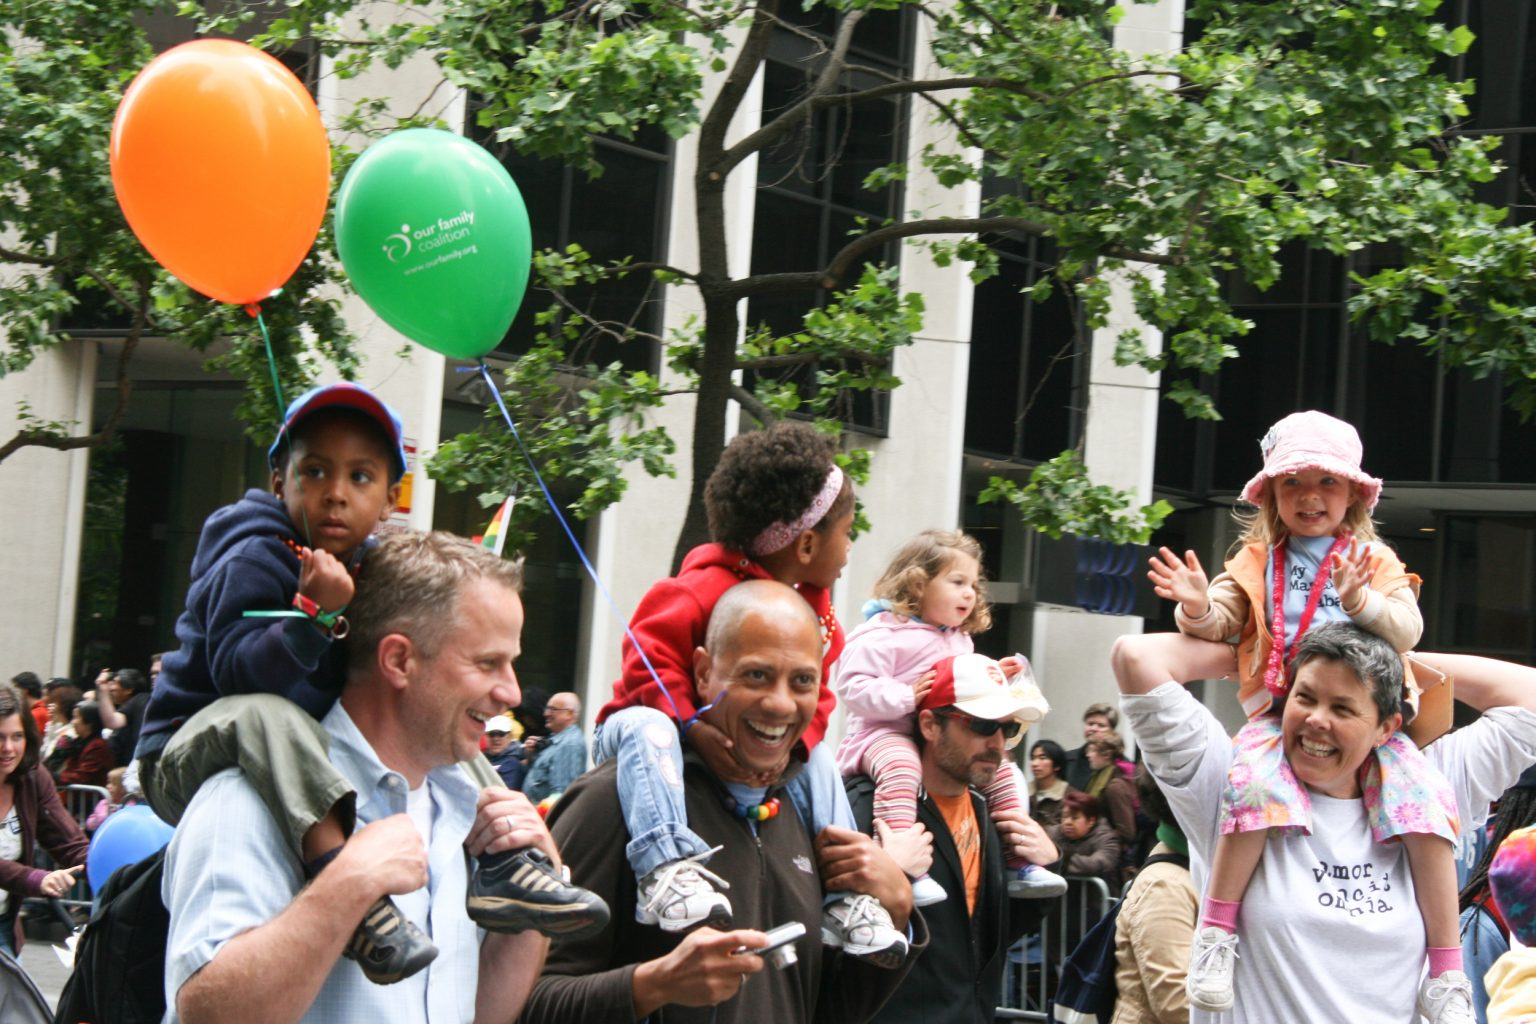 Parents with children on their shoulders smile, hold balloons, and walk down the street